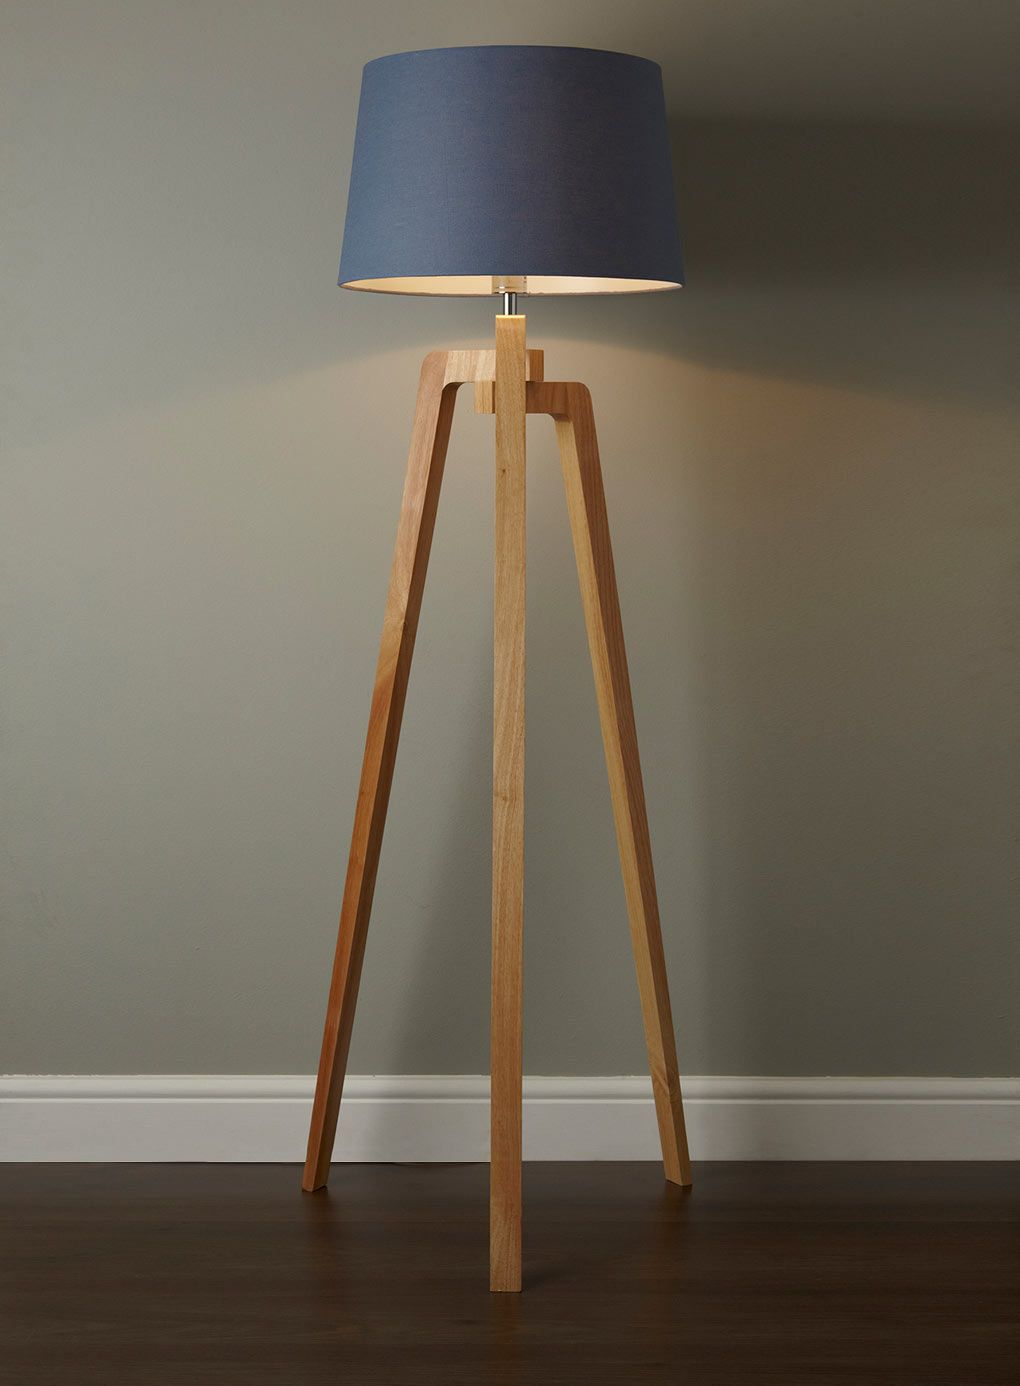 Co Wooden Tripod Floor Lamp Bhs Lampe Regal with sizing 1020 X 1386